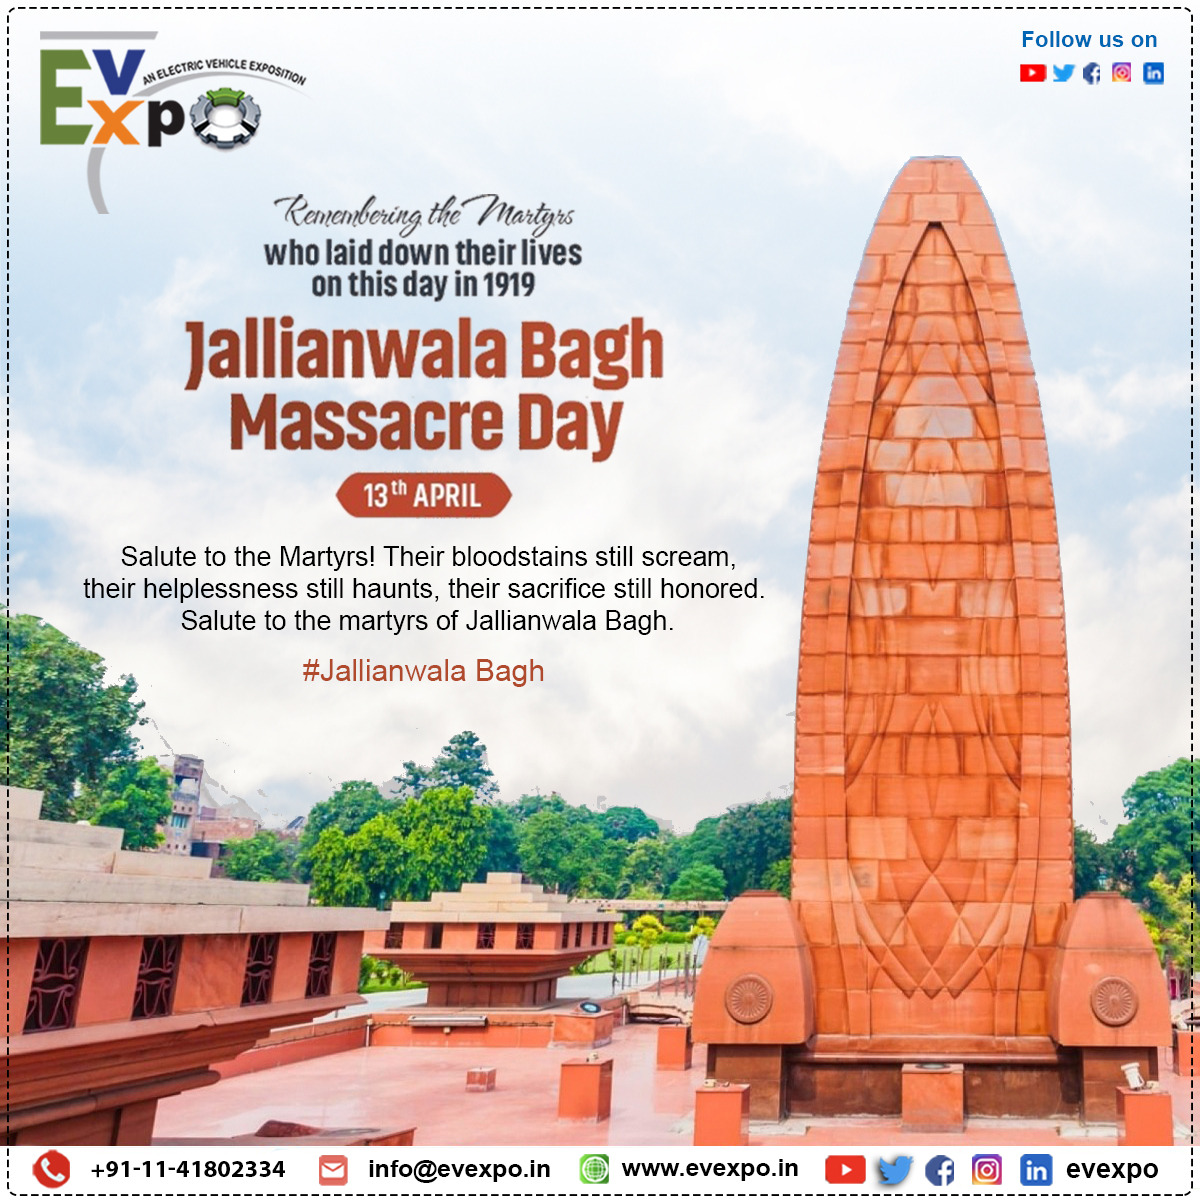 Today, at EvExpo, we remember the tragic events of Jallianwala Bagh Massacre Day. On this solemn occasion, we honor the lives lost in the 1919 massacre, a dark chapter in India's struggle for independence. 

#JallianwalaBaghMassacre  #jallianwalabagh  #Peace  #FreedomIsNotFree